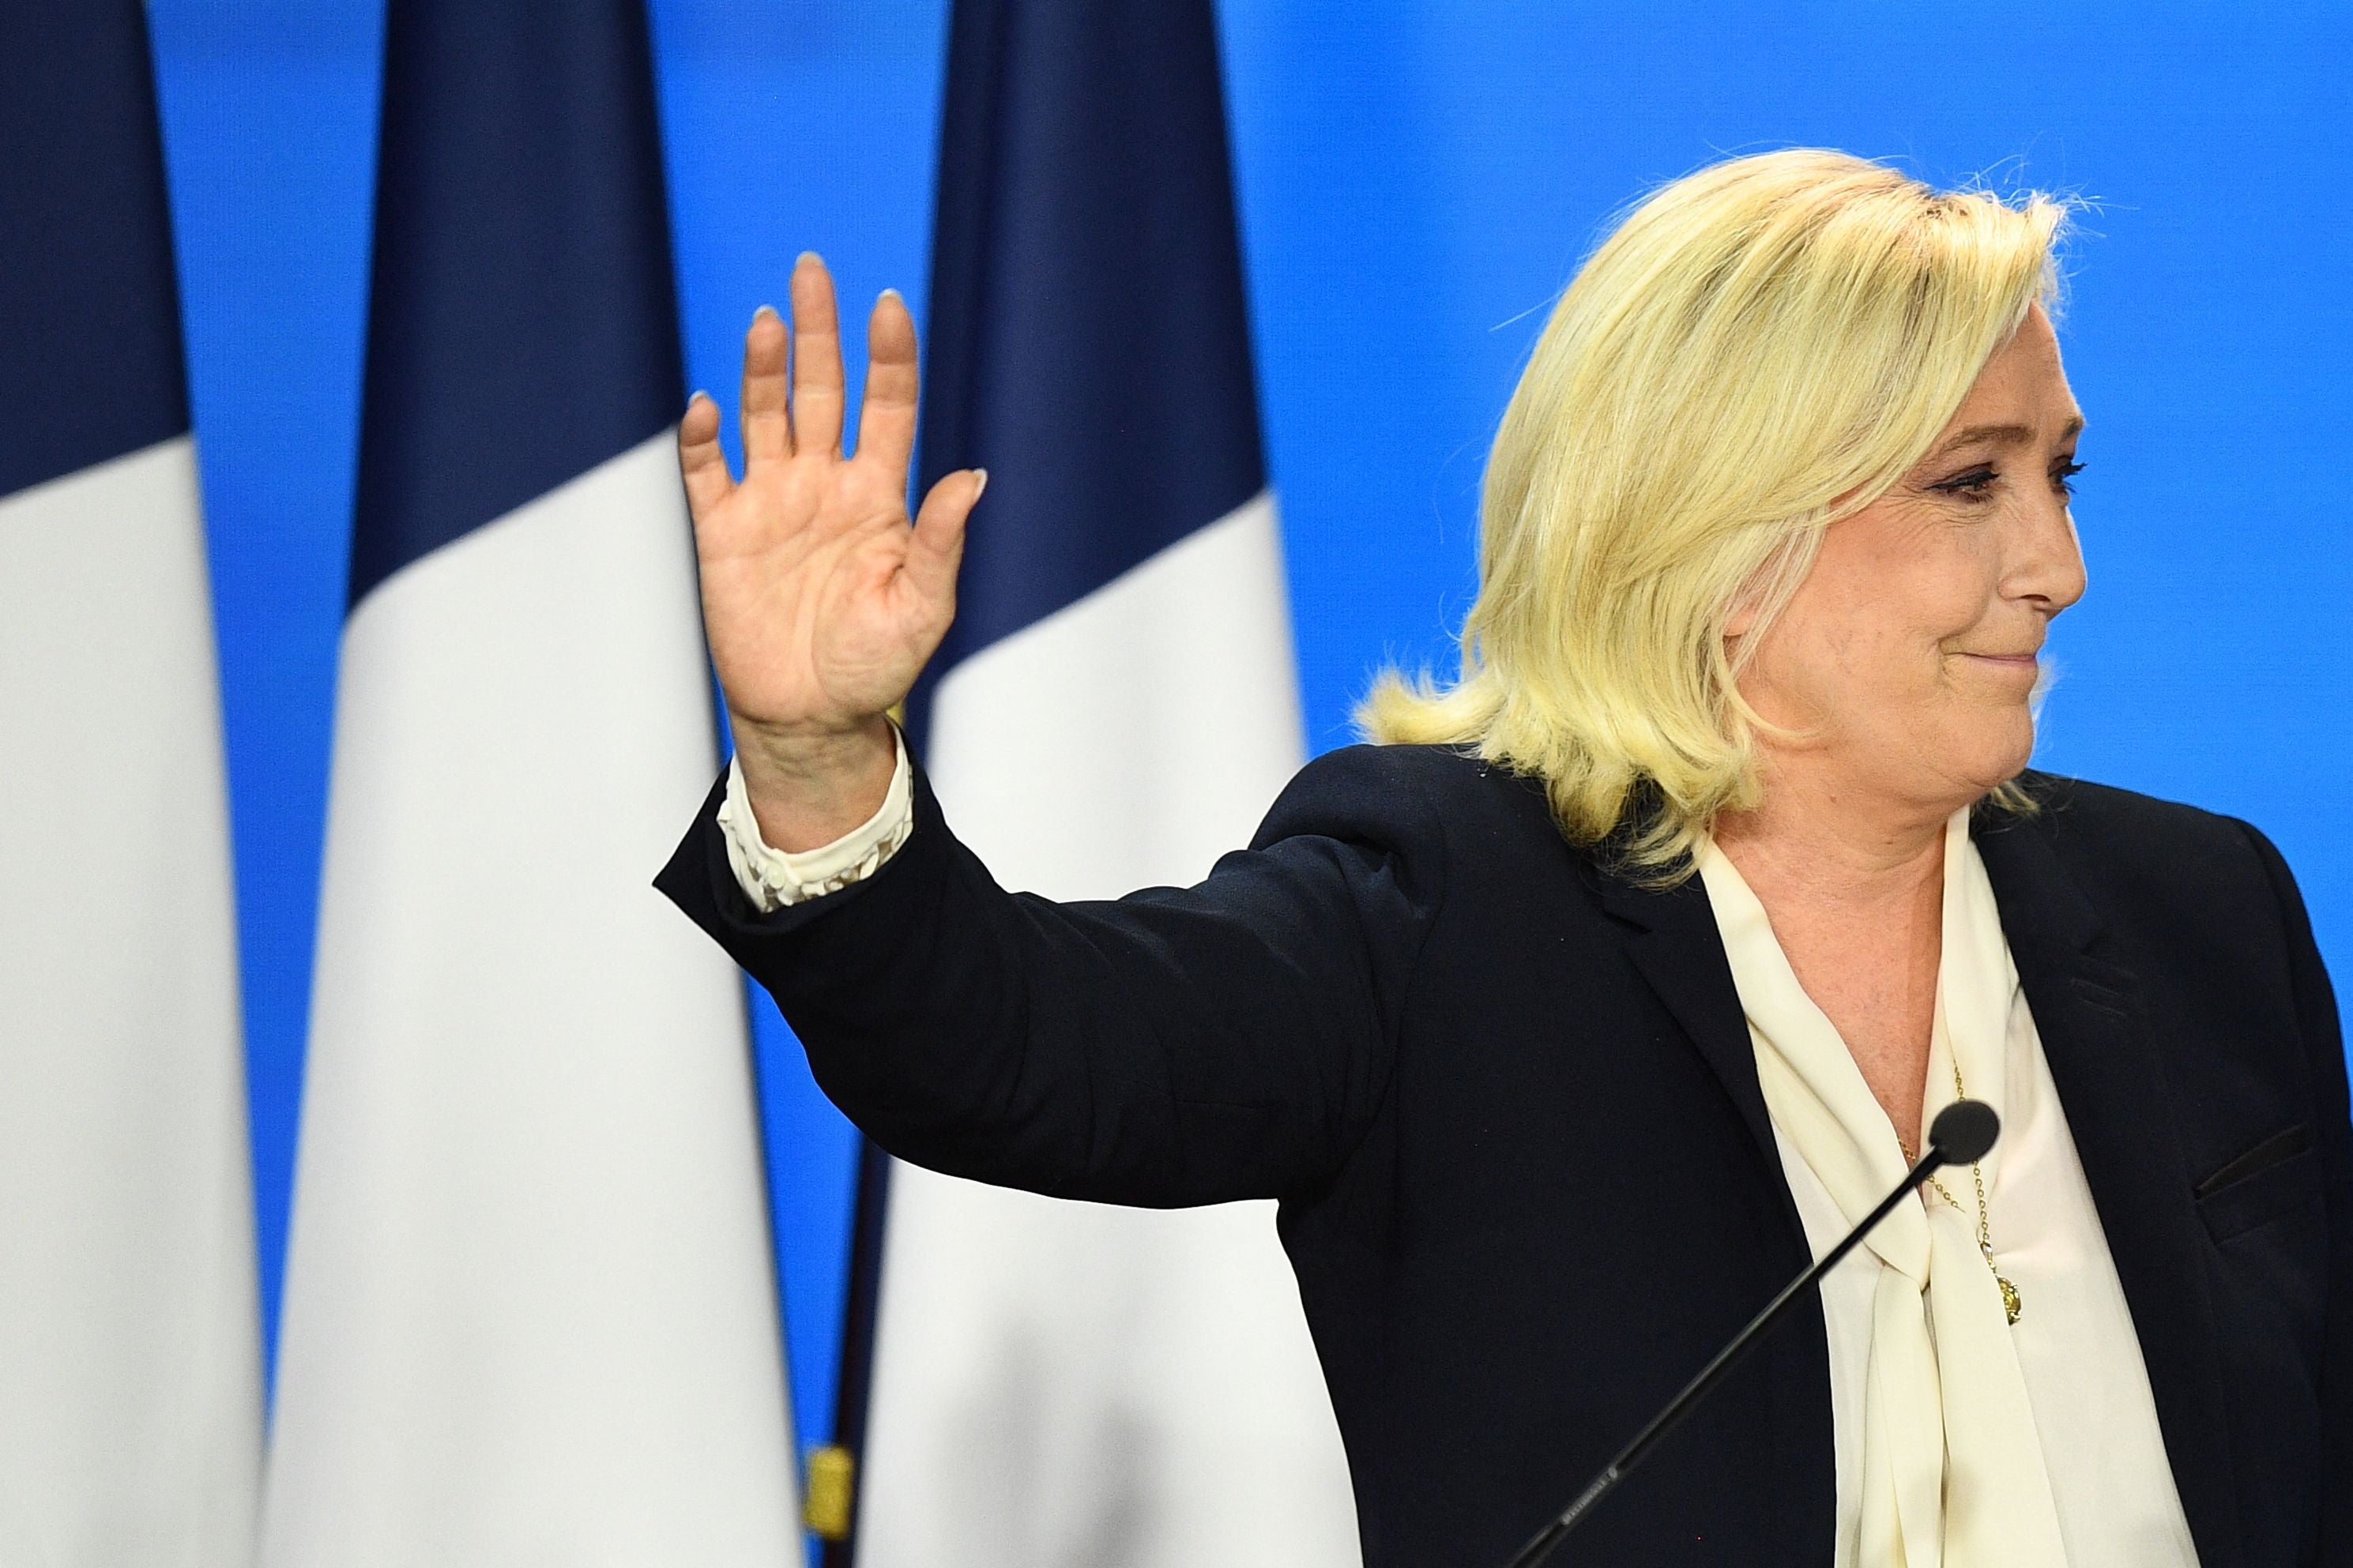 Farewell, not goodbye. Marine Le Pen reacts after her defeat